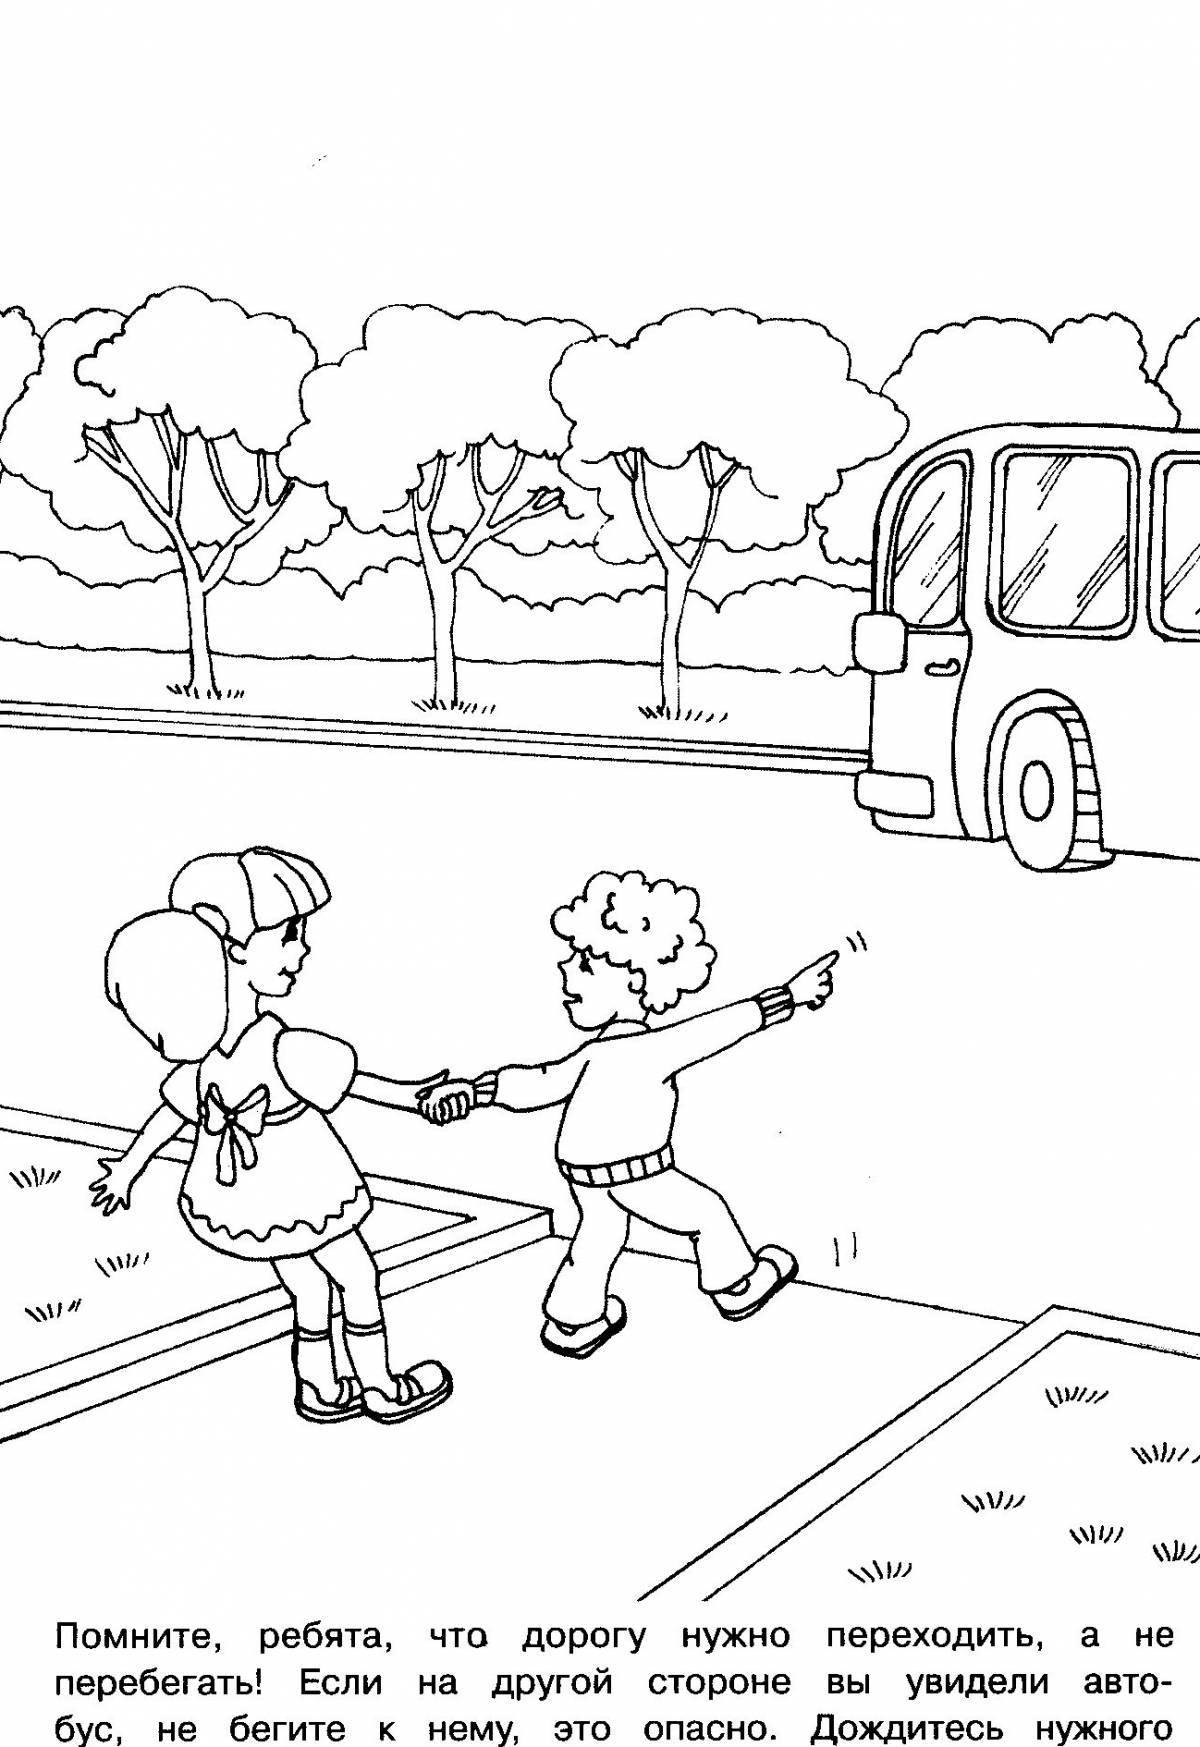 Amazing road coloring book for kids